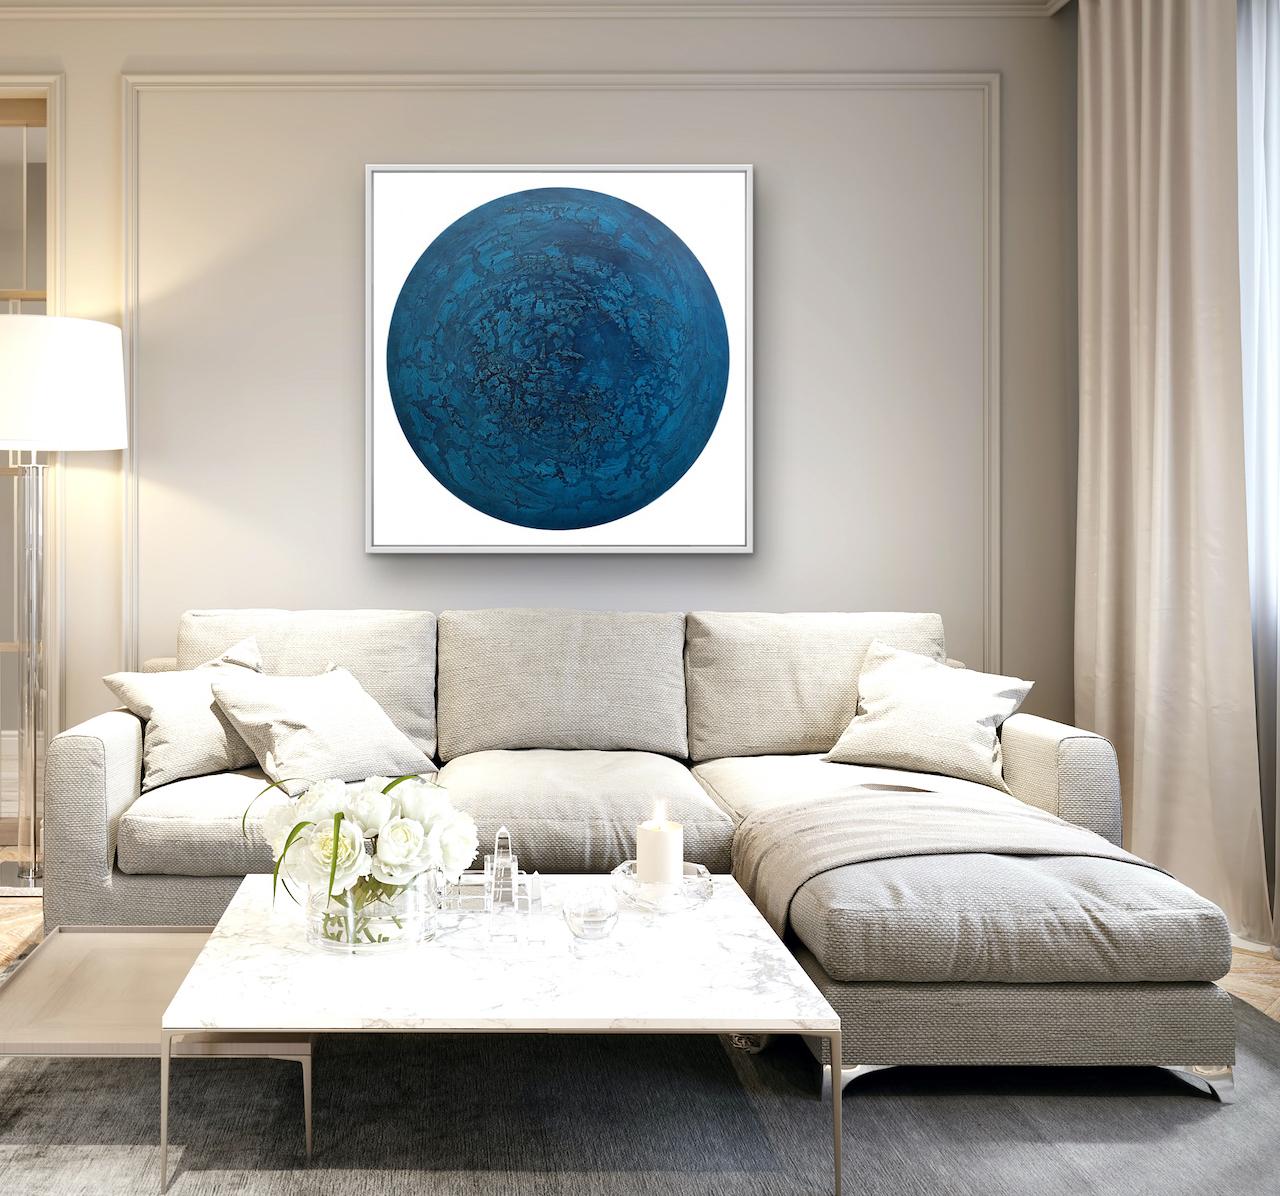 The CN series of paintings take inspiration from research into the surface structure of planets and the moon.

Discover artworks by Jonathan Moss available to buy online and in our art gallery. 